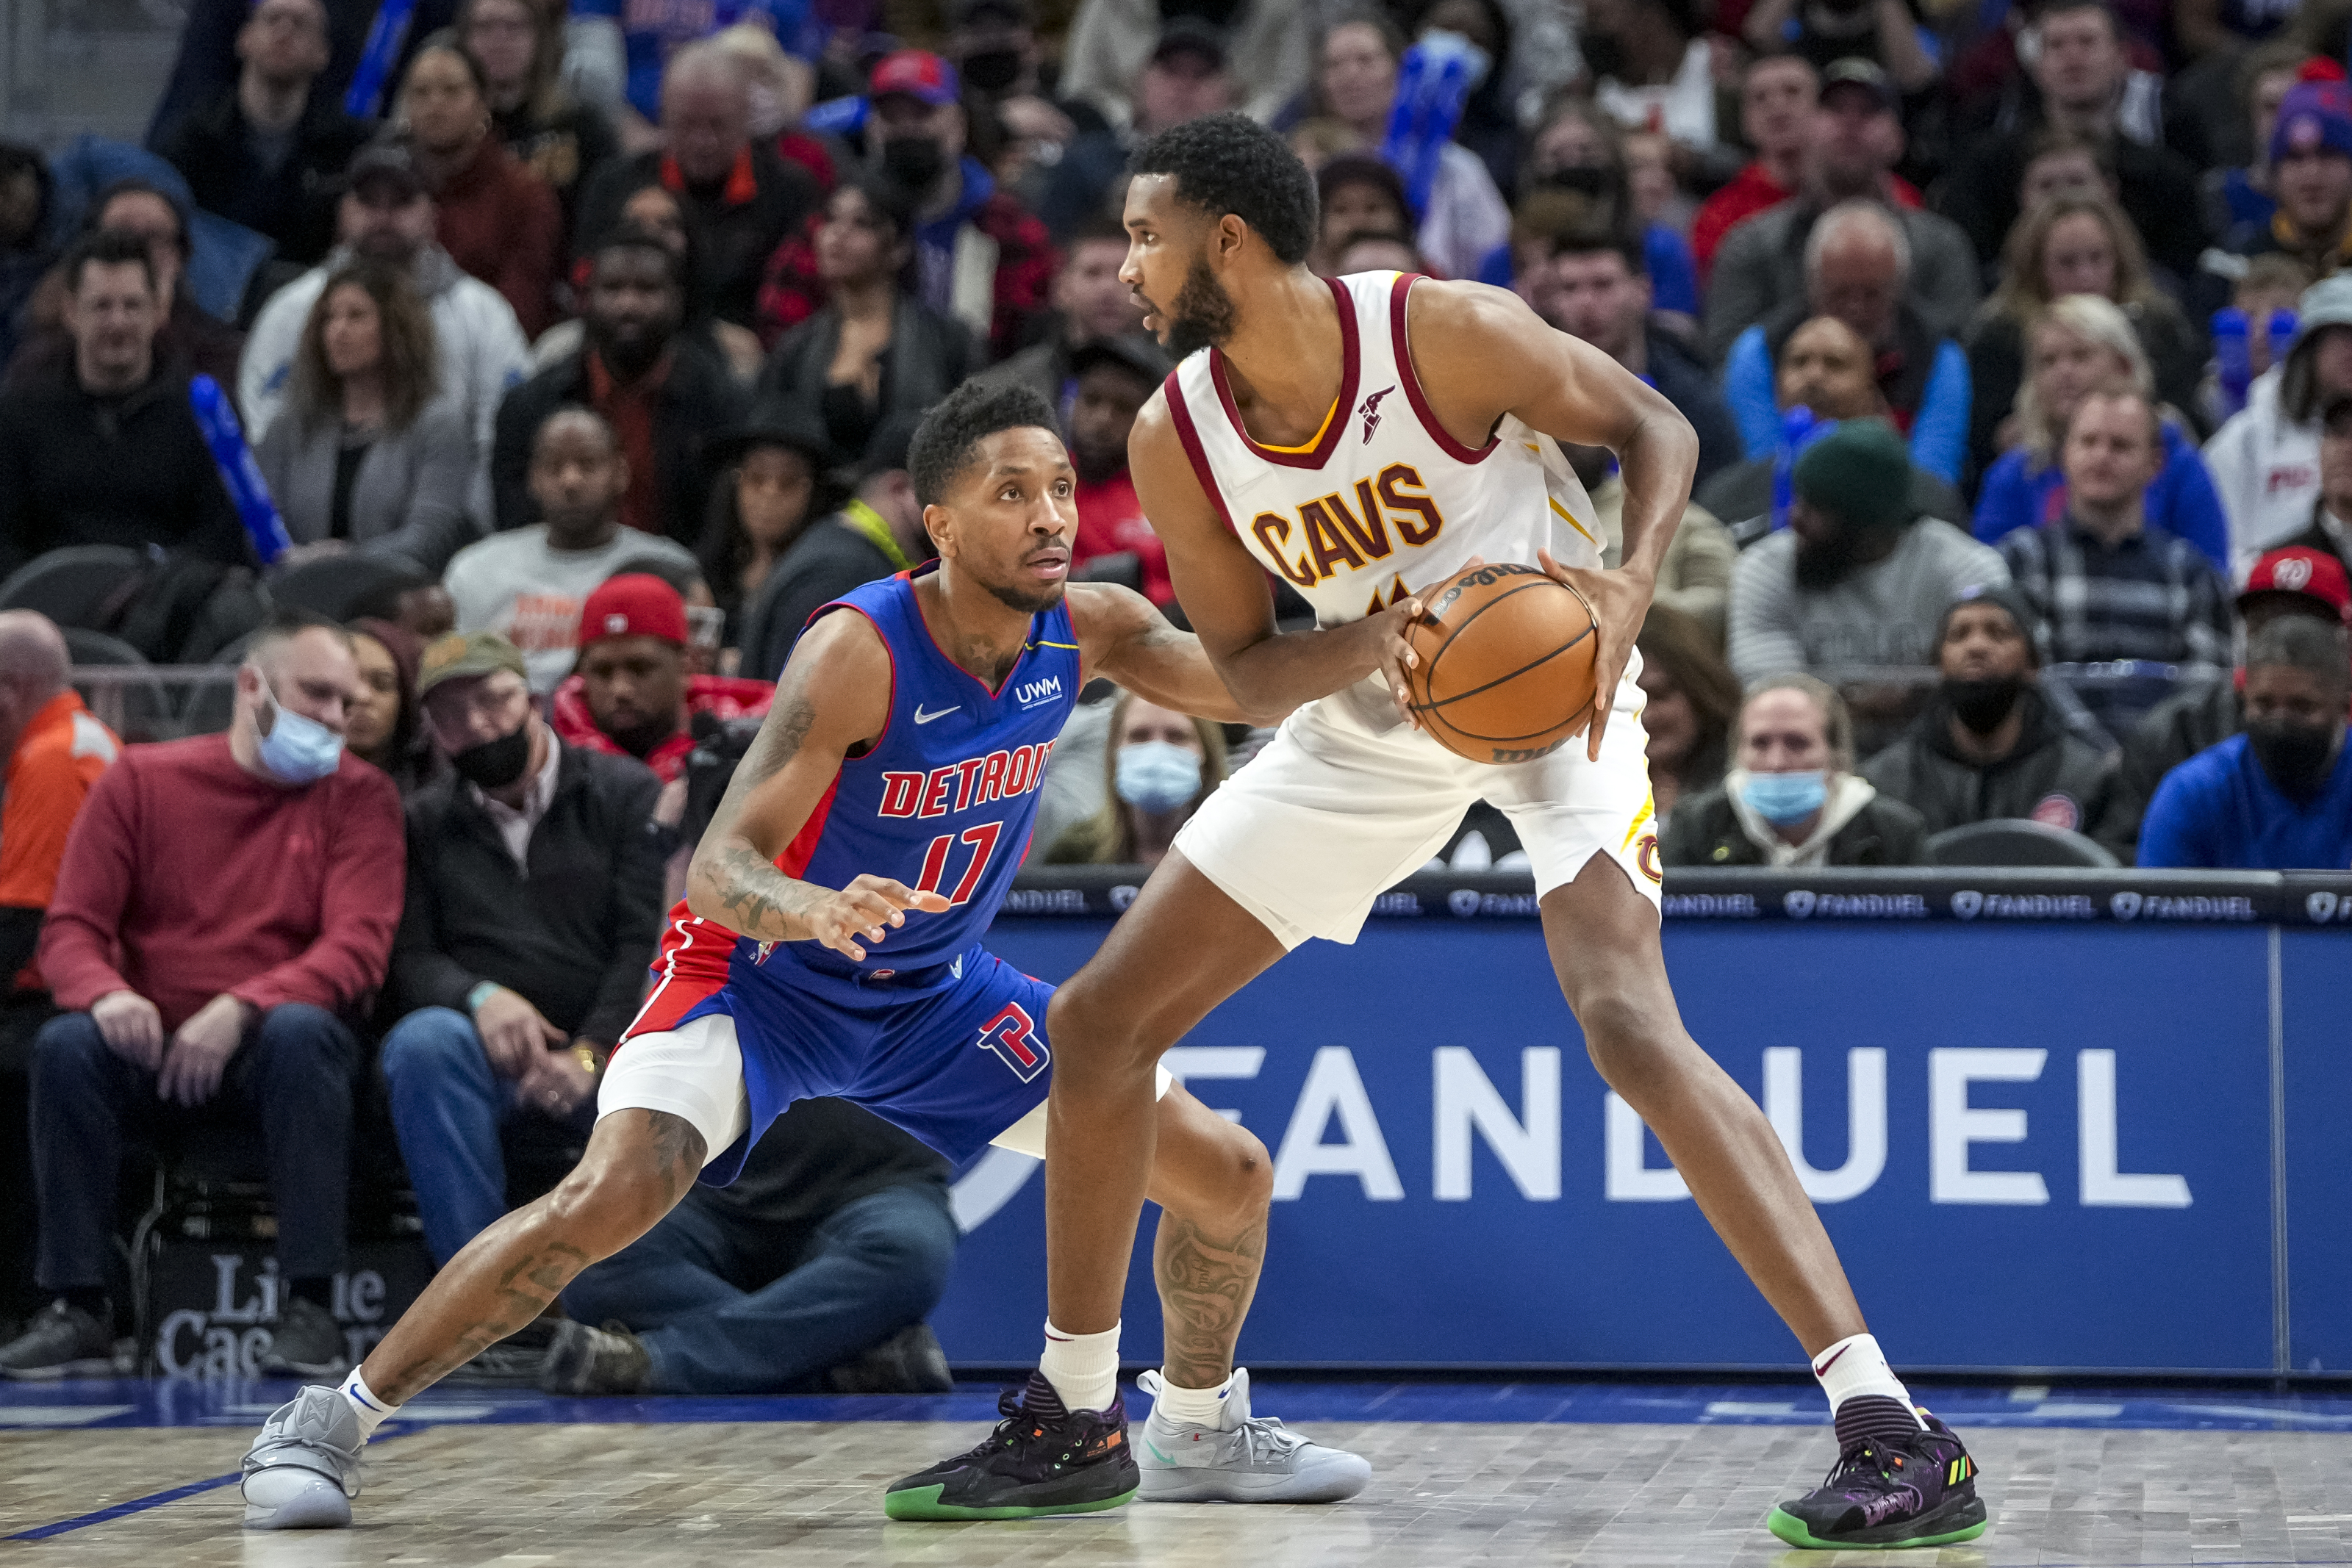 Lakers vs. Cavaliers prediction, odds, line: 2022 NBA picks, March